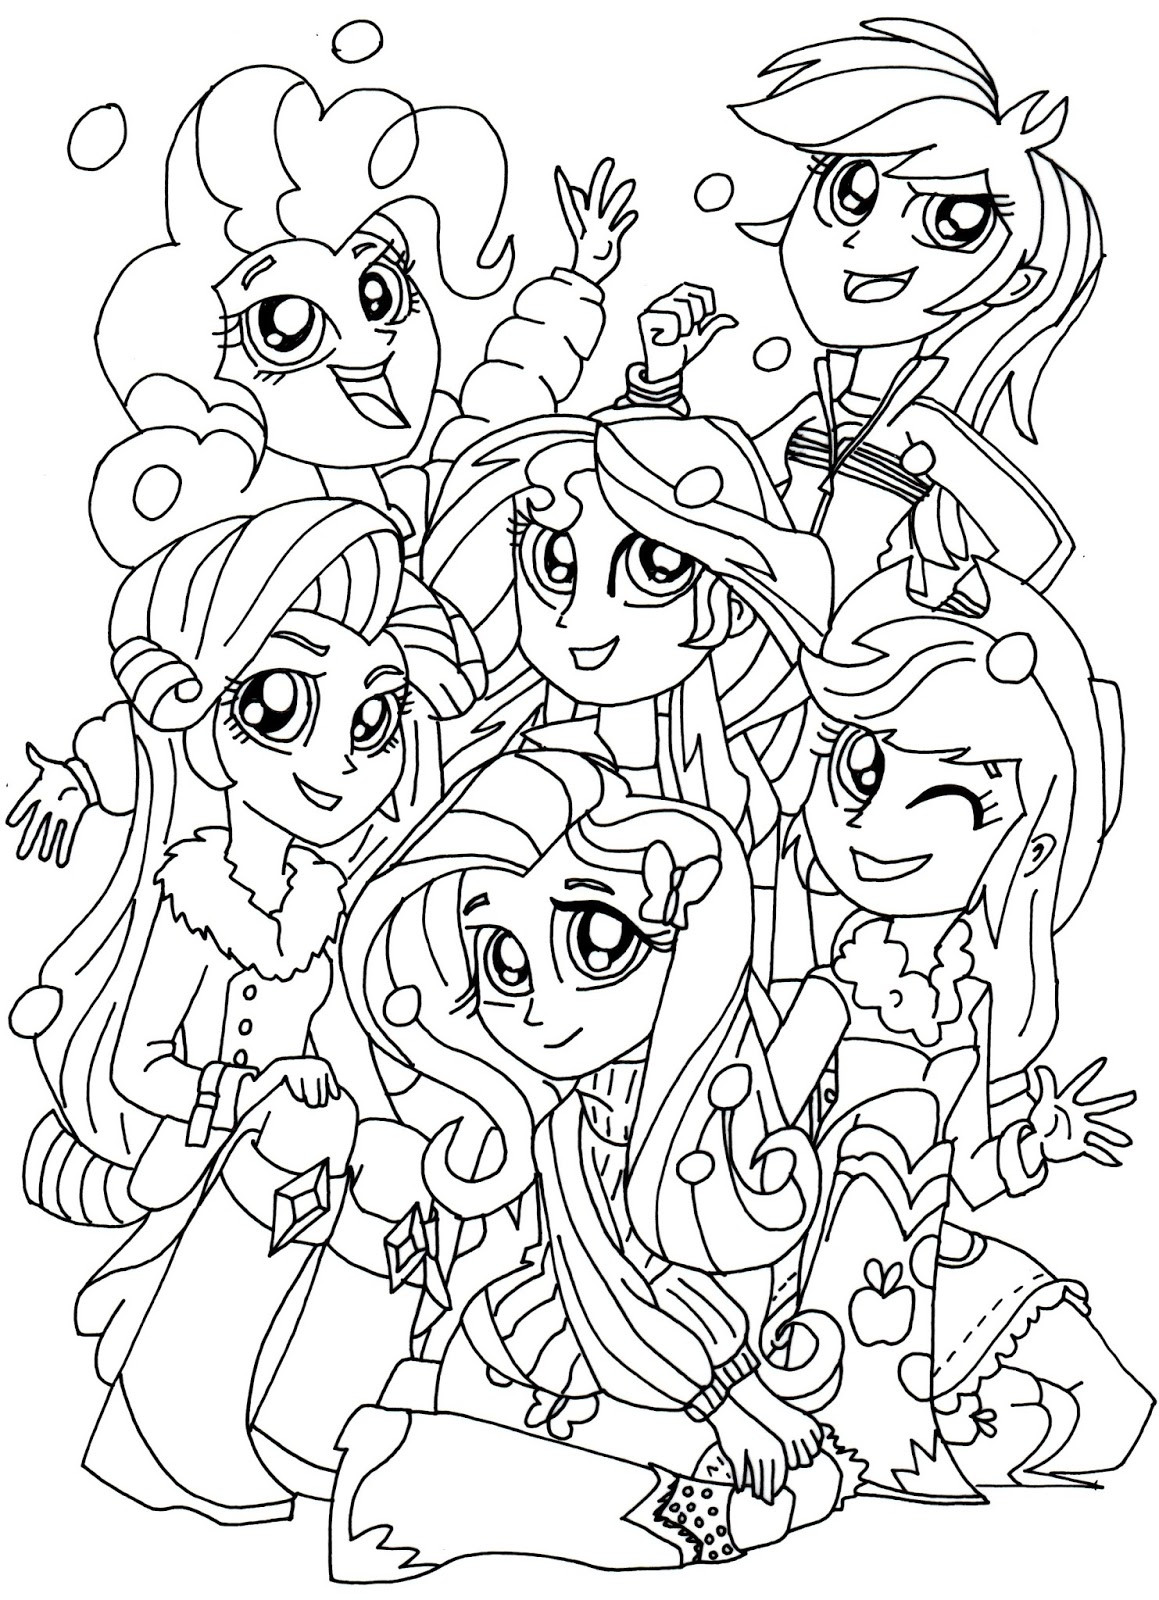 Equestria Girls Pinkie Pie Coloring Pages
 Free Printable My Little Pony Coloring Pages January 2016